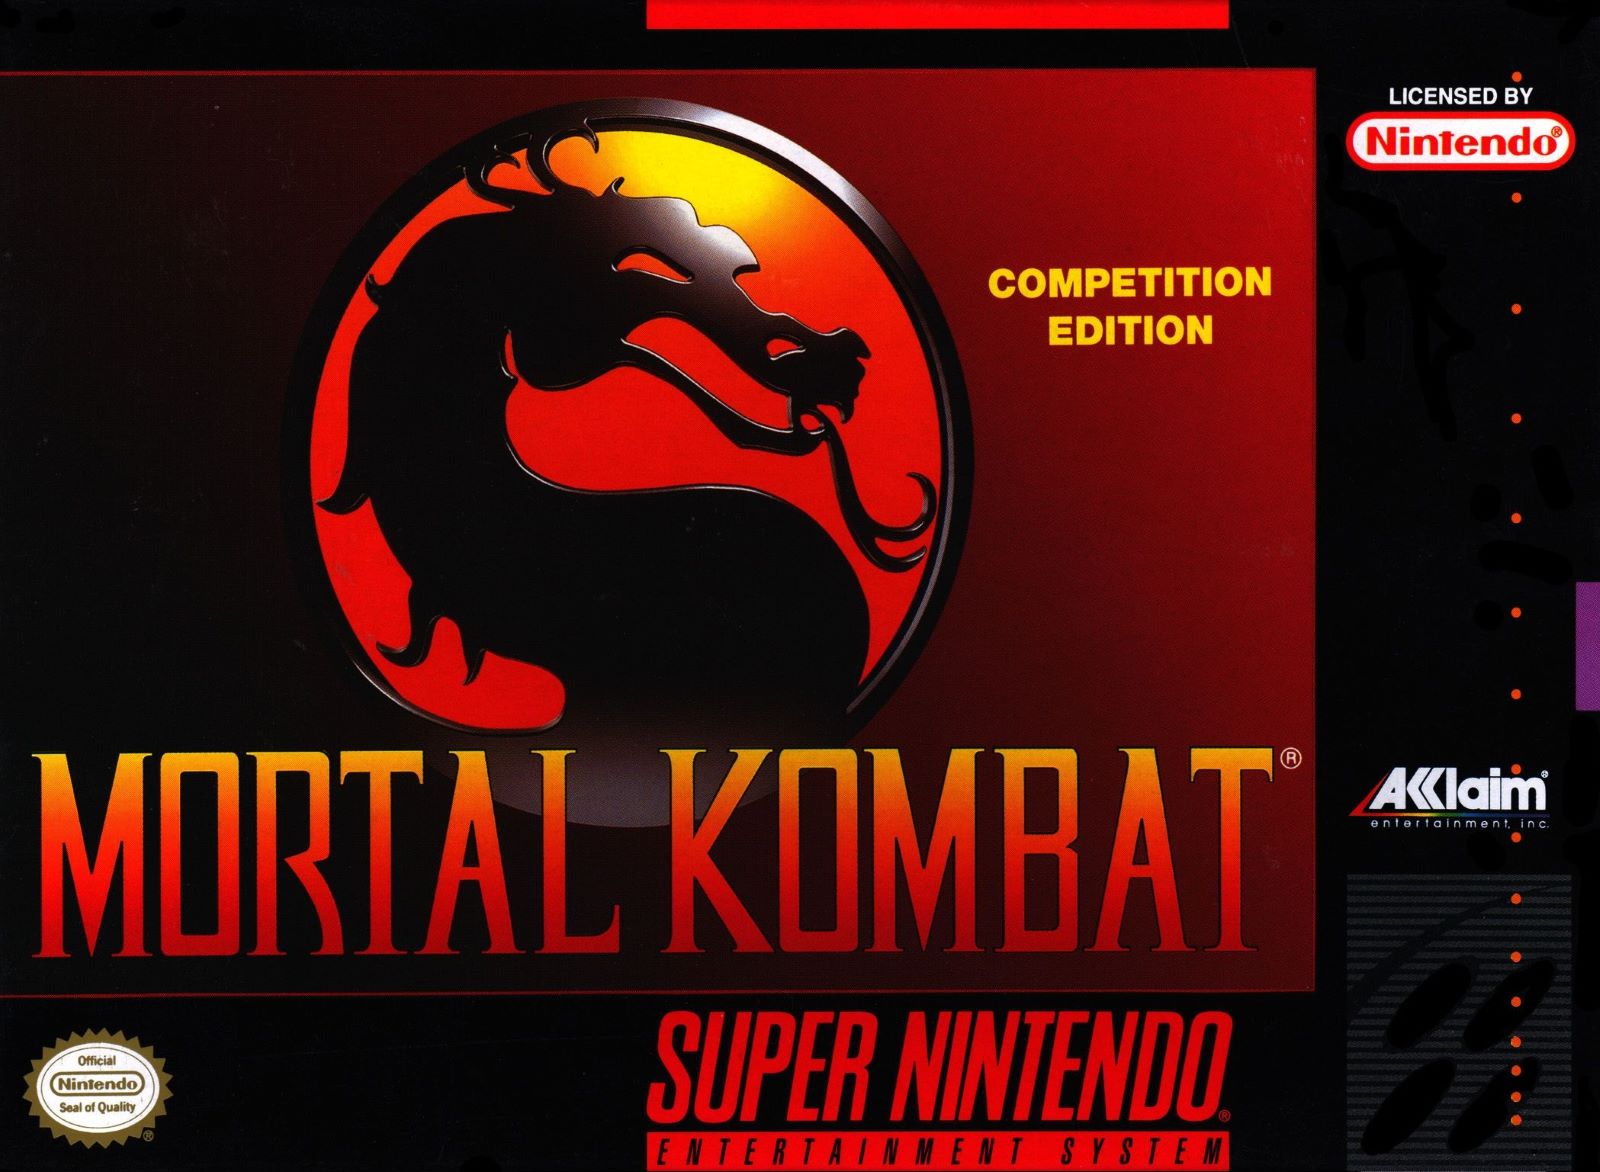 
                                    Mortal Kombat's Marquee, seen on the Arcade cabinet